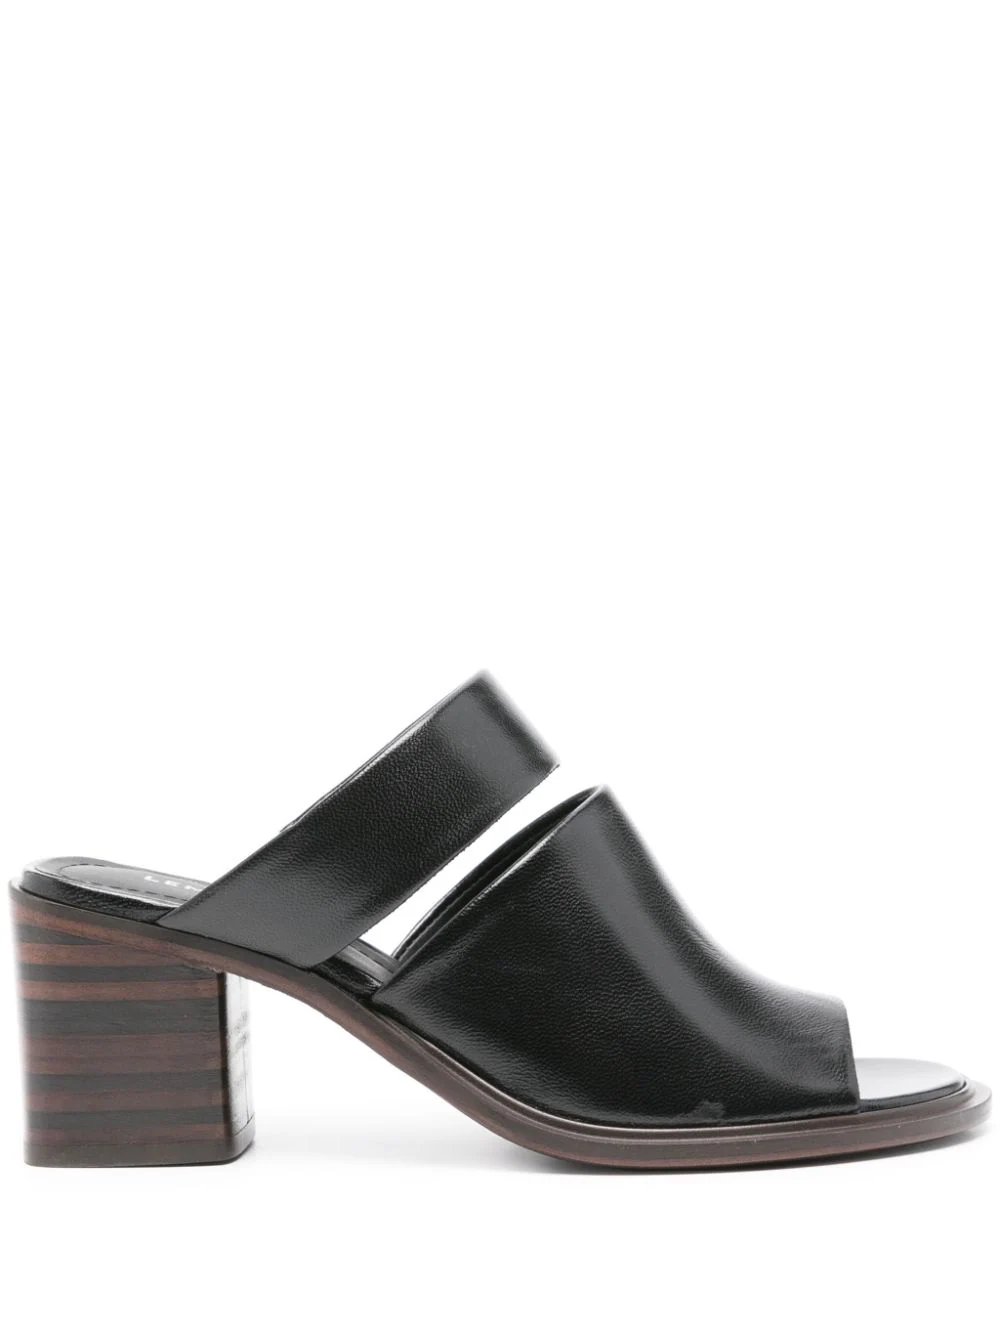 Lemaire Mules With 55mm Medium Heel In Black